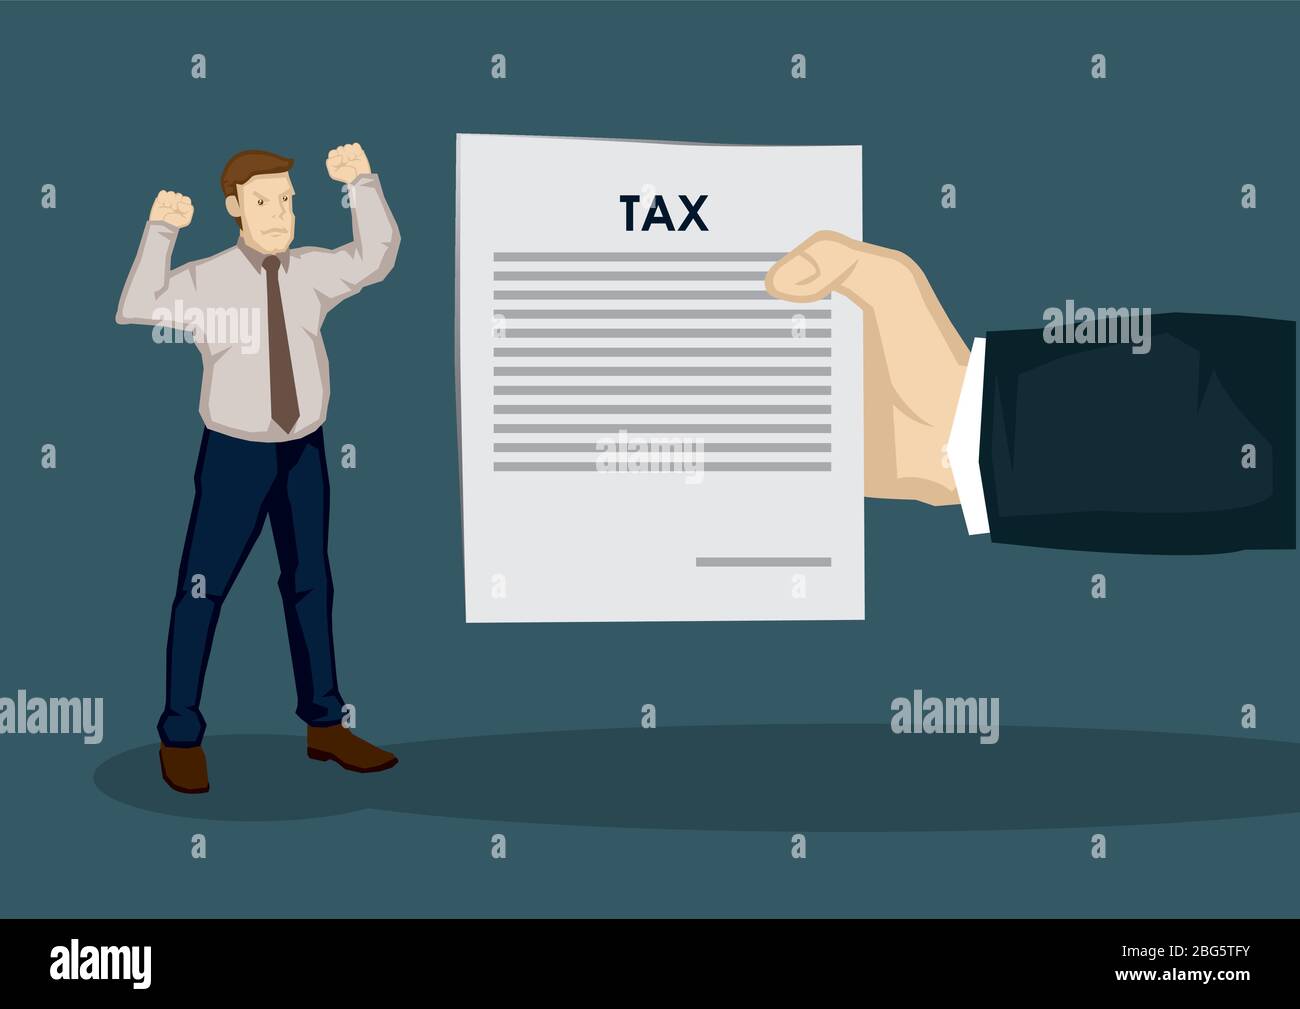 An angry cartoon man and a huge hand, representing tax collector, holding a document with title, Tax. Creative vector illustration on taxation concept Stock Vector